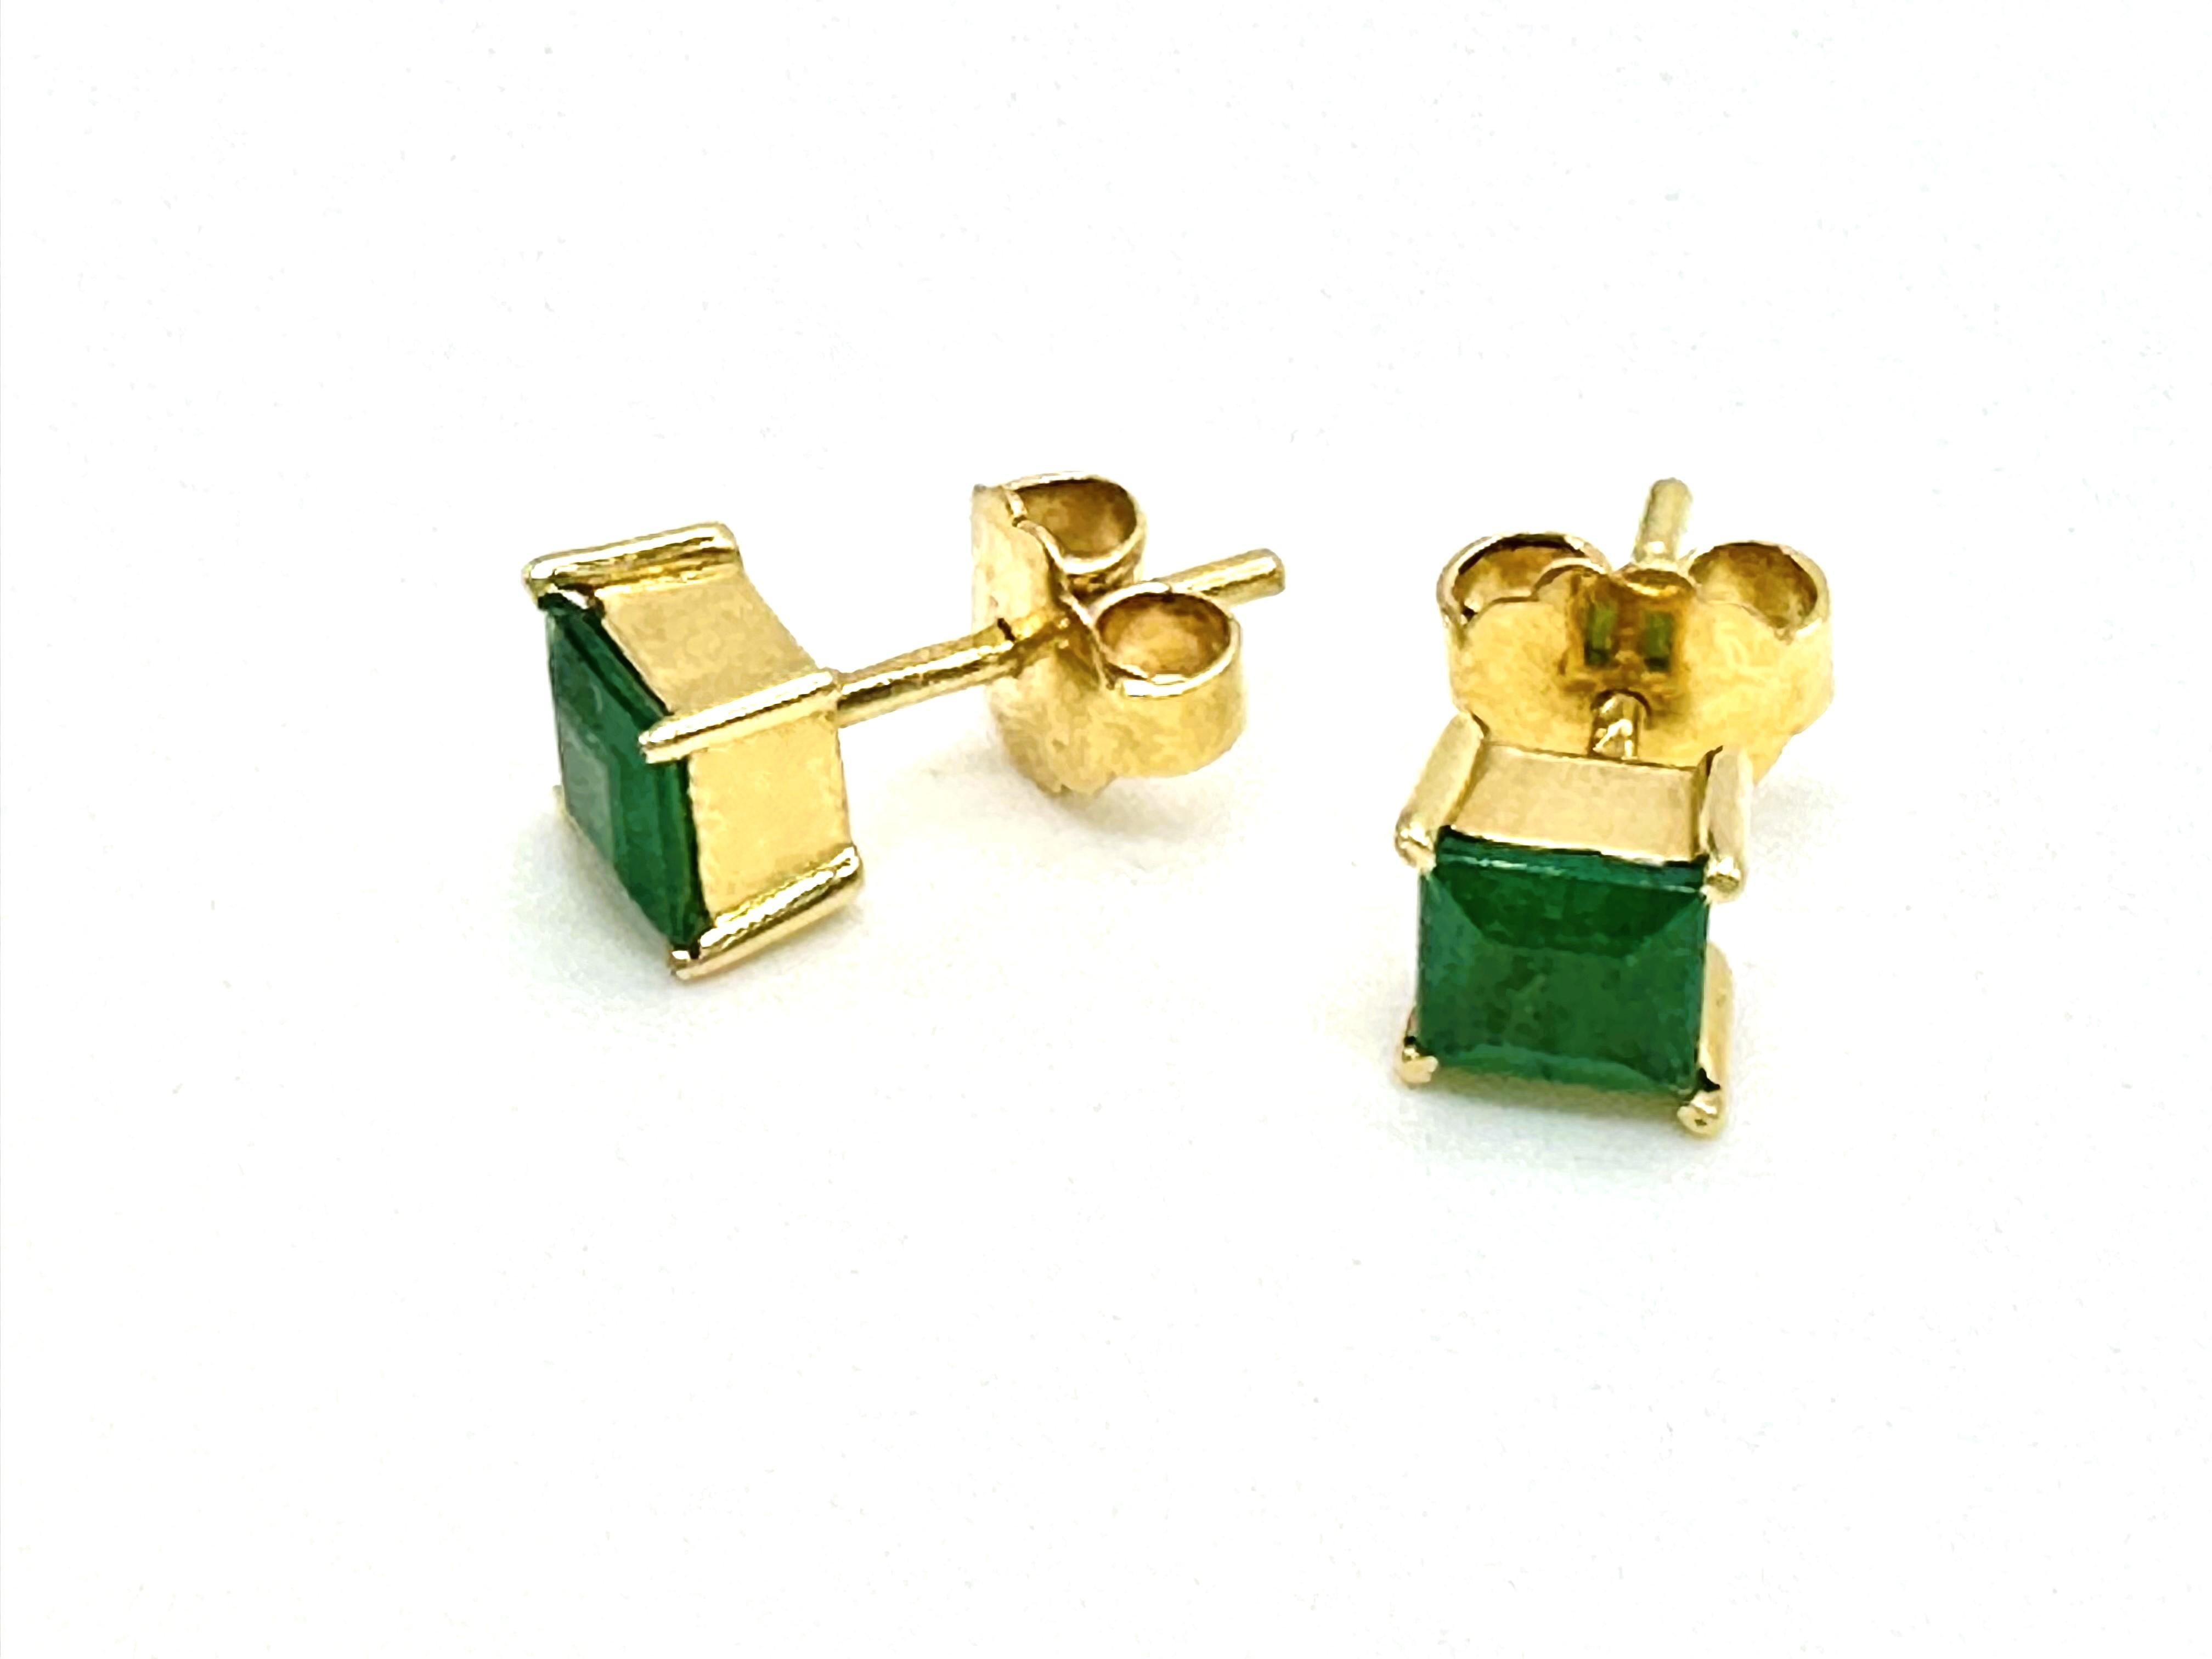 Emerald Cut Earrings in 18k Yellow Gold and 0.269 Carats of Emeralds For Sale